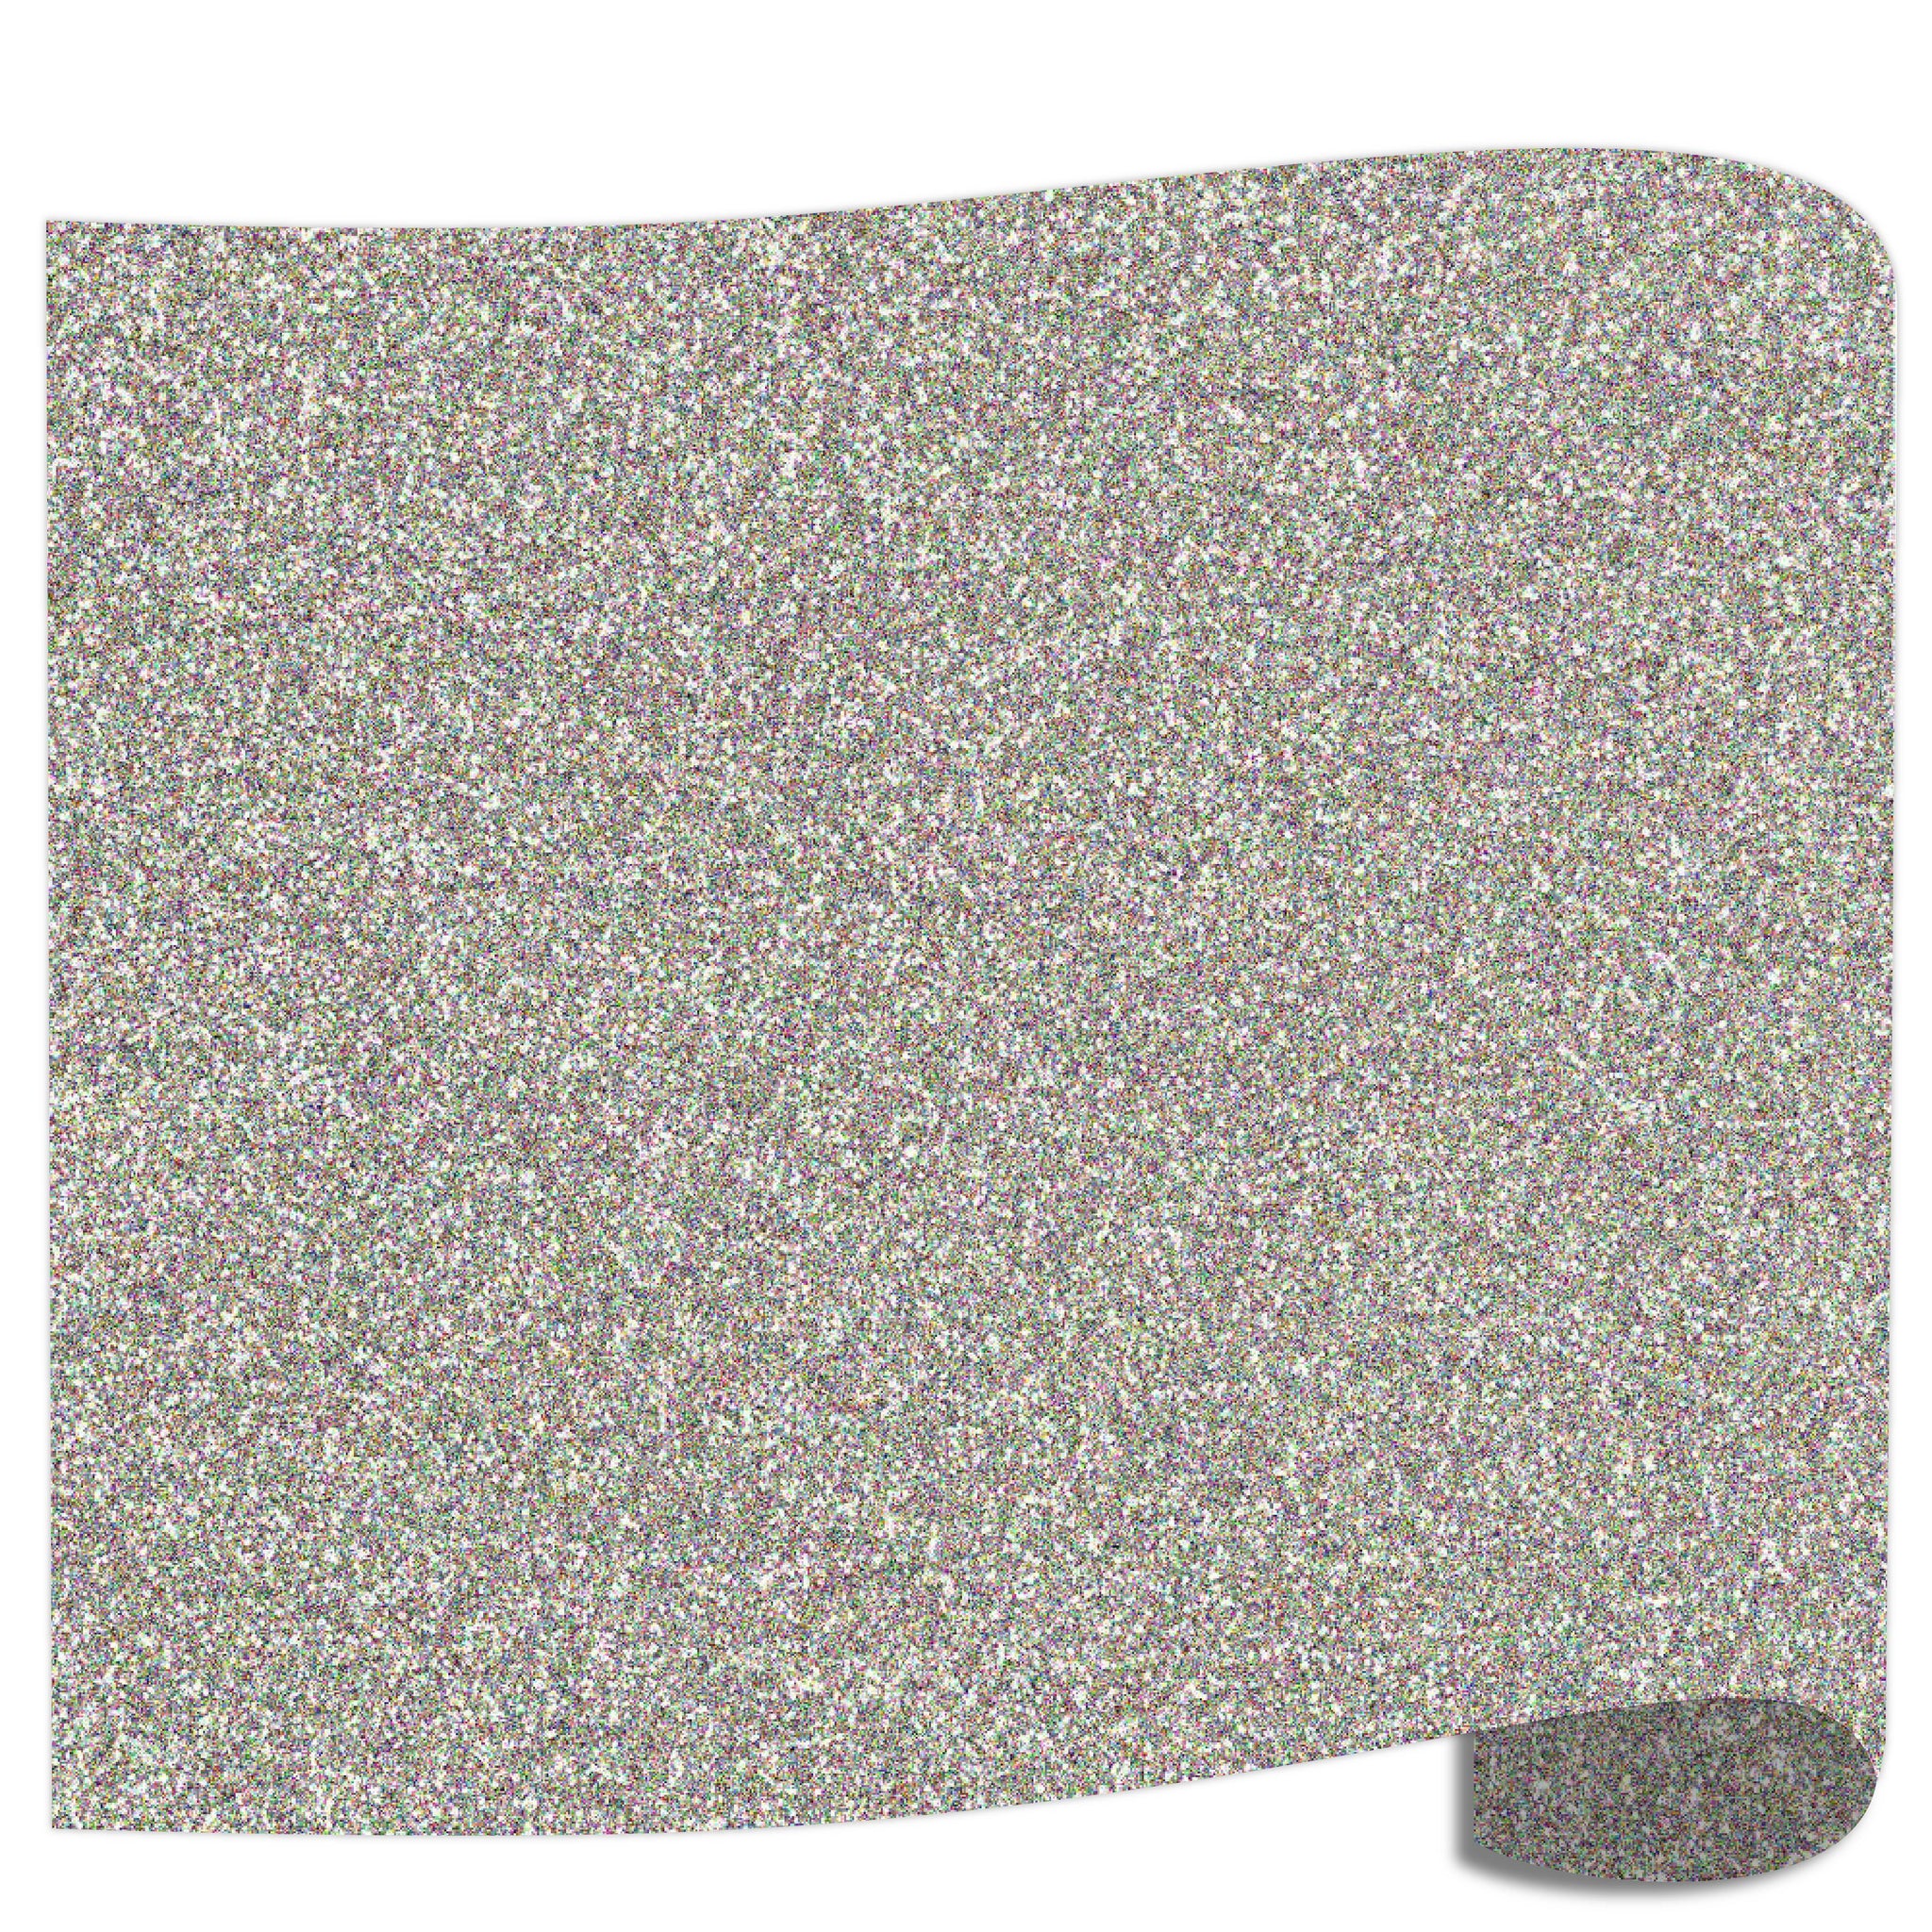 Sparkly White Glitter Heat Transfer Vinyl HTV for Tshirt 2 Sheets,12 Inches by 20 inches/Sheet